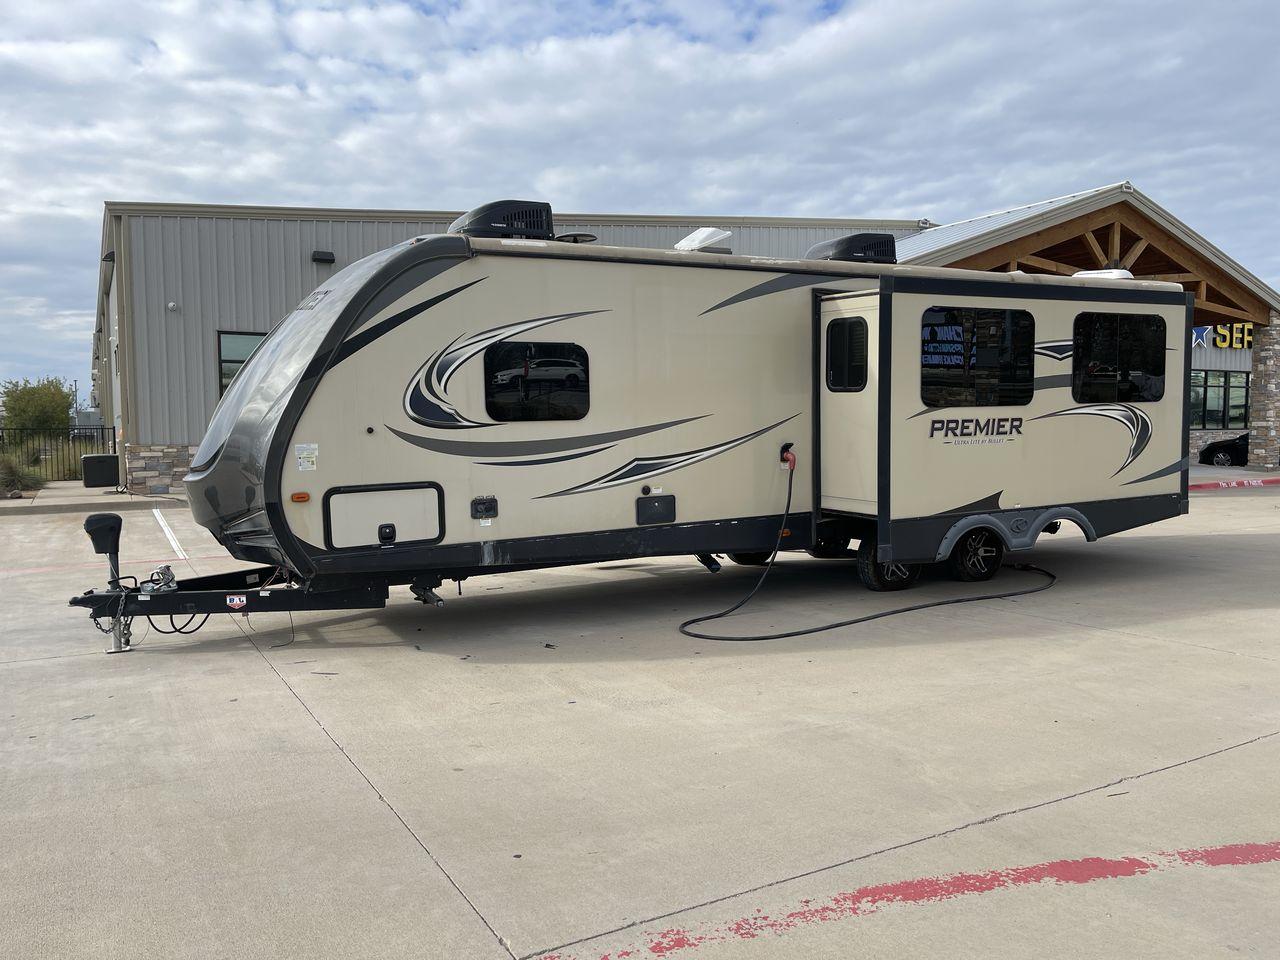 2018 BLACK KEYSTONE PREMIER 30RIPR (4YDT29R22JD) , Length: 35.42 ft. | Dry Weight: 6,675 lbs. | Gross Weight: 8,200 lbs. | Slides: 2 transmission, located at 4319 N Main St, Cleburne, TX, 76033, (817) 678-5133, 32.385960, -97.391212 - With a length of 35 feet and a dry weight of 6,675 pounds, the 2018 Keystone Premier 30K offers spacious living quarters while remaining lightweight and easy to tow. Inside the Premier 30K, you'll be greeted by a beautifully designed interior that boasts residential-style finishes and upscale amenit - Photo #23